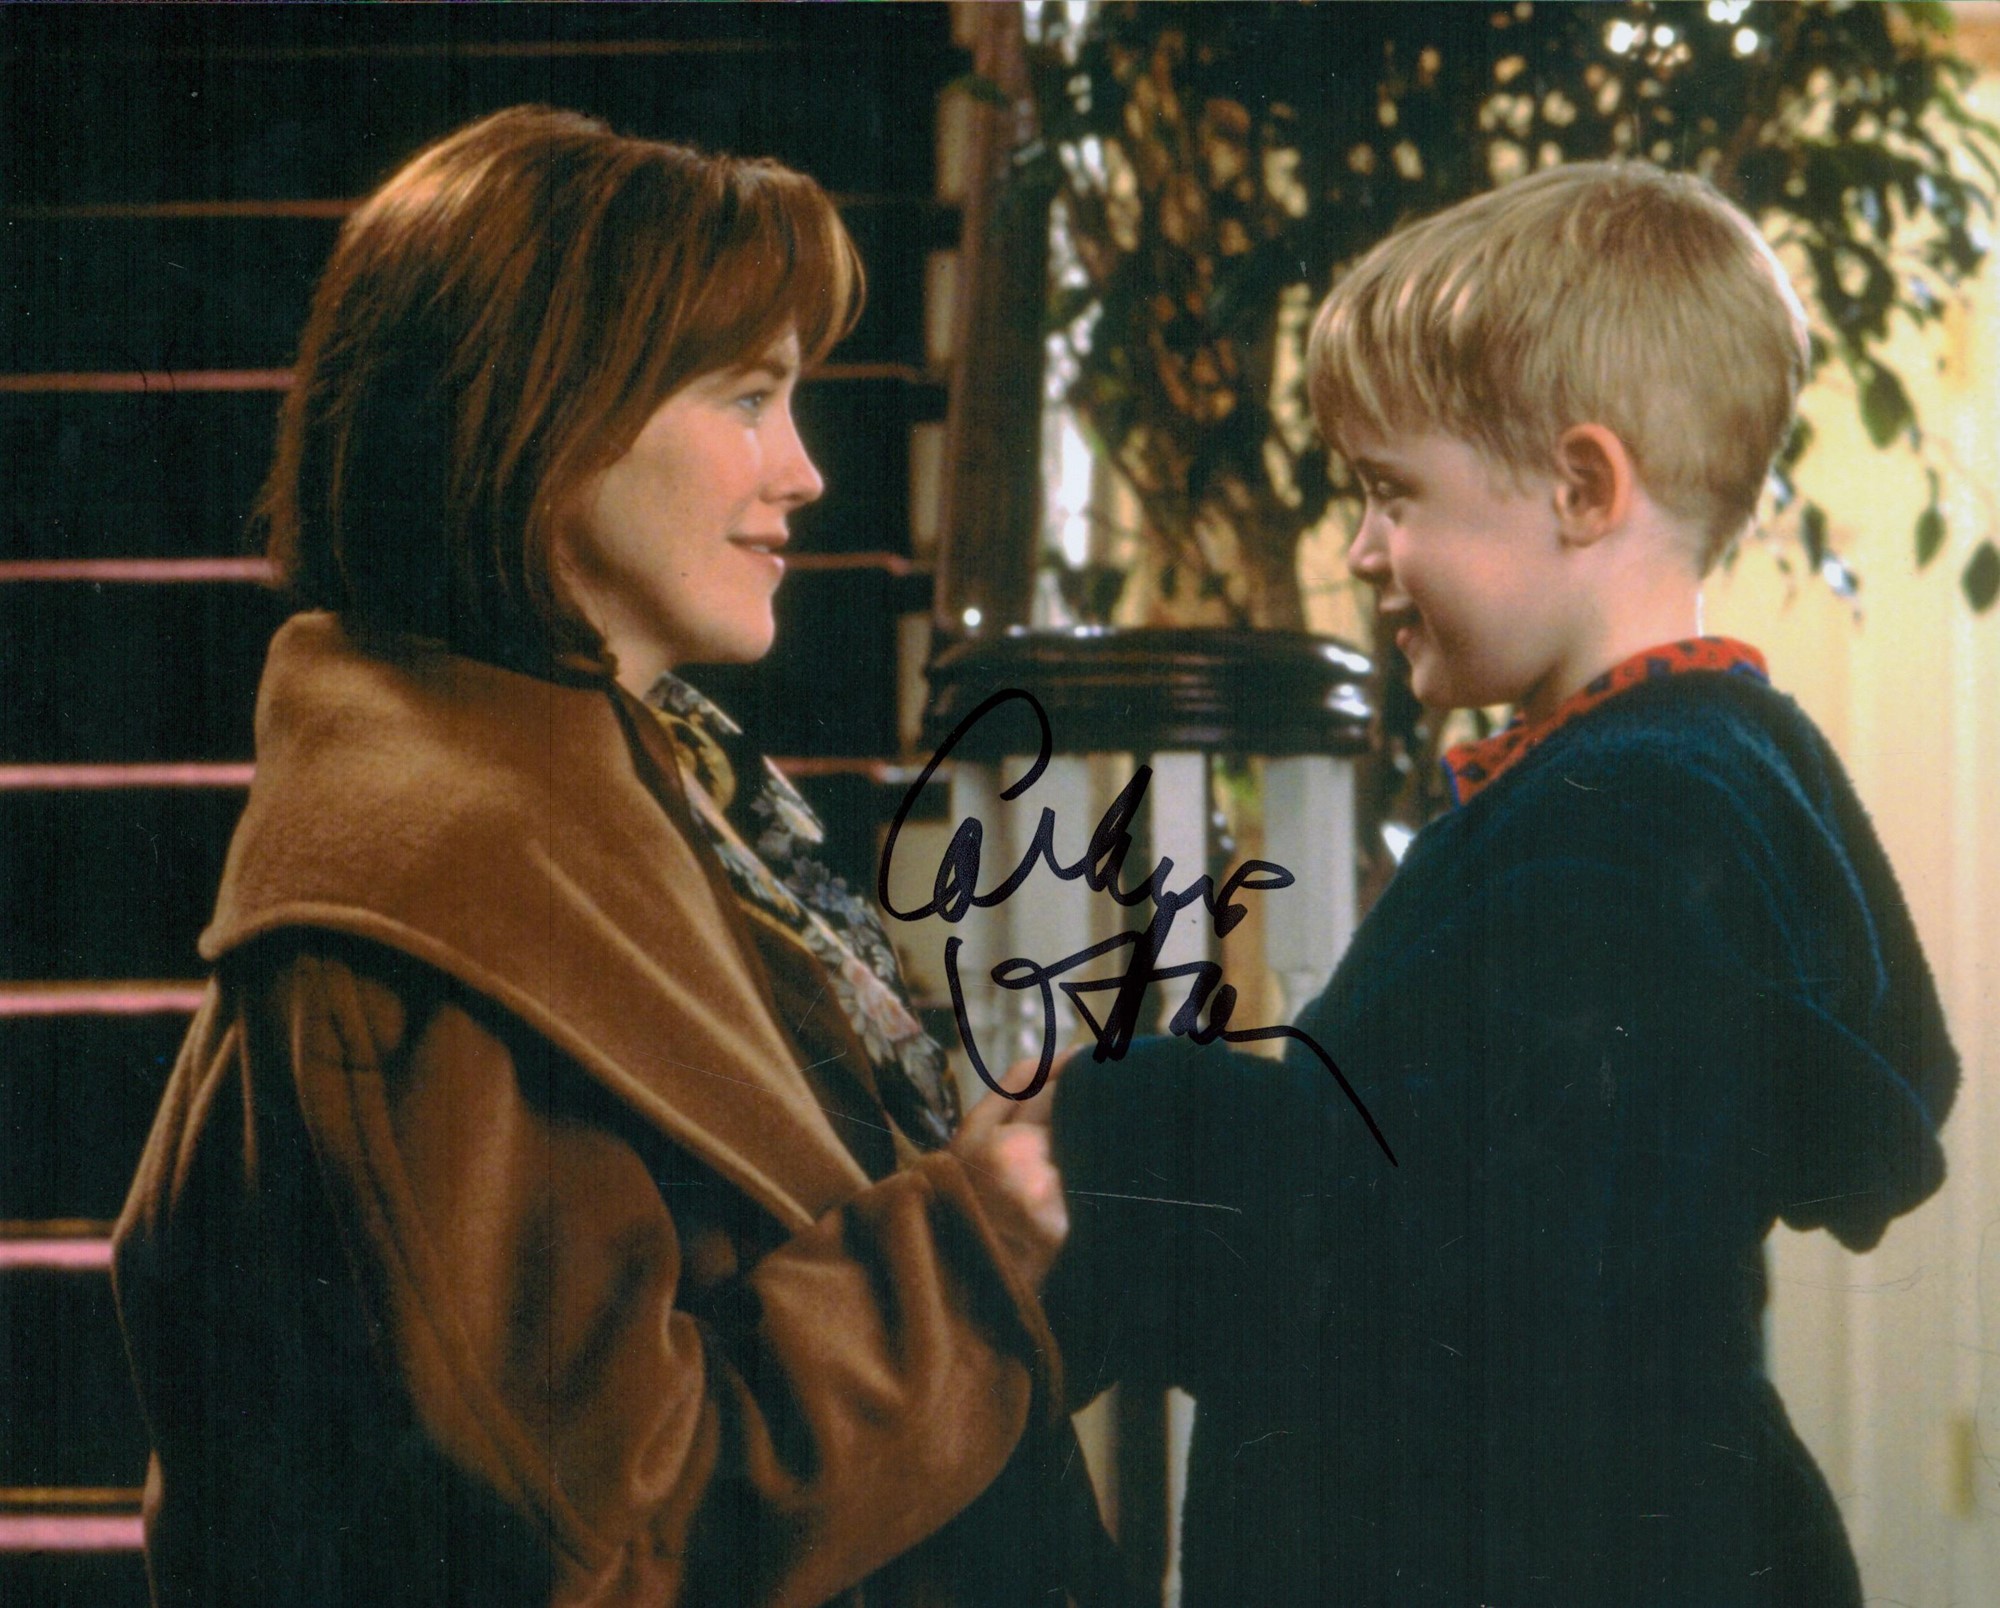 Home Alone Actor, Catherine O'Hara signed 10x8 inch colour photograph pictured during her role as